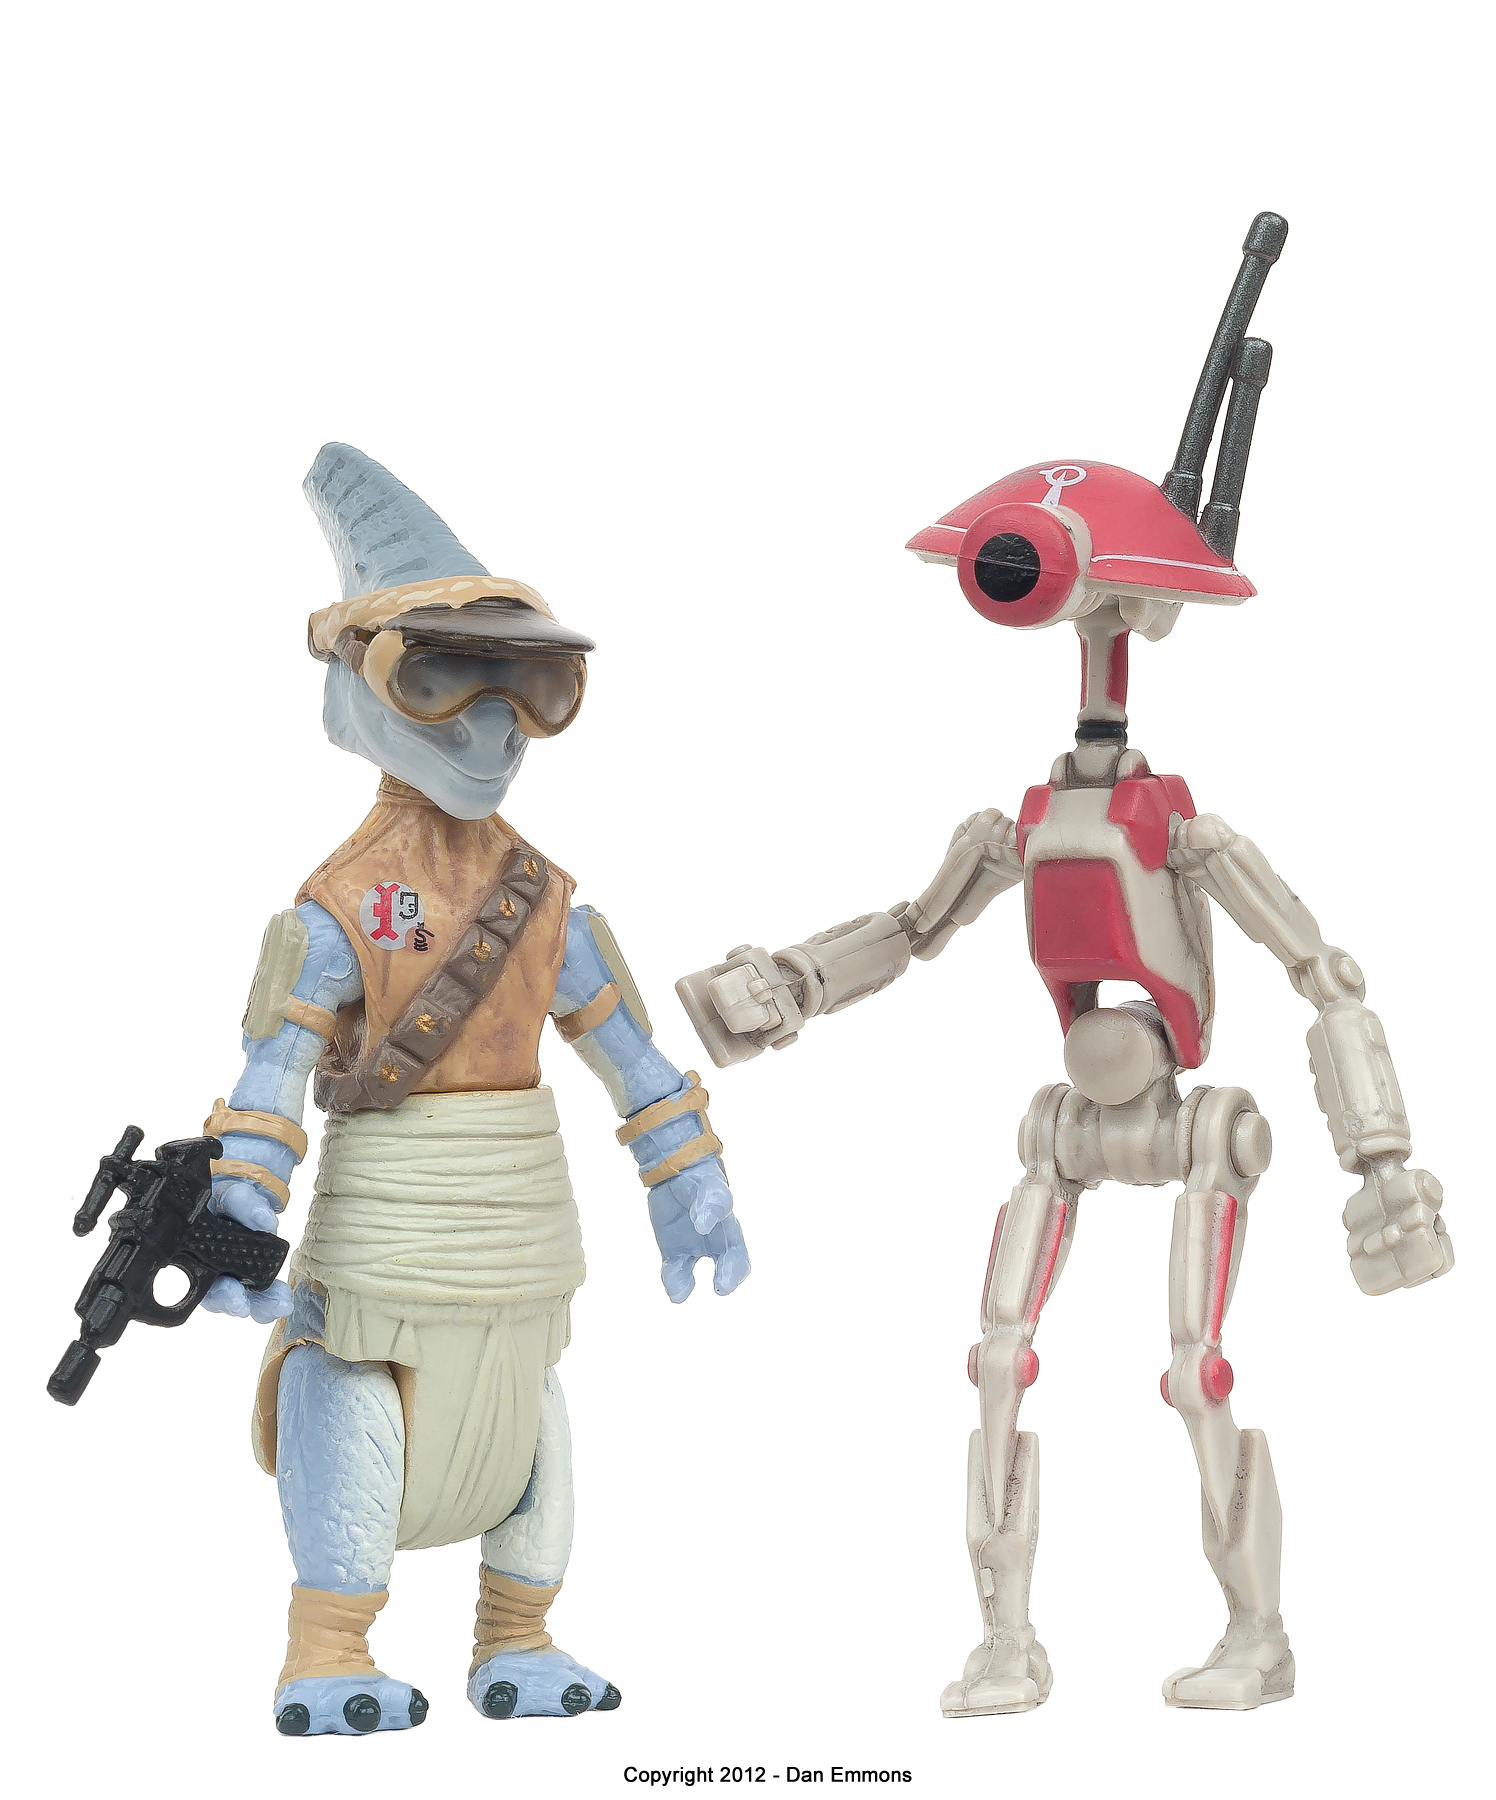 The Vintage Collection - VC77: Ratts Tyrell & Pit Droid